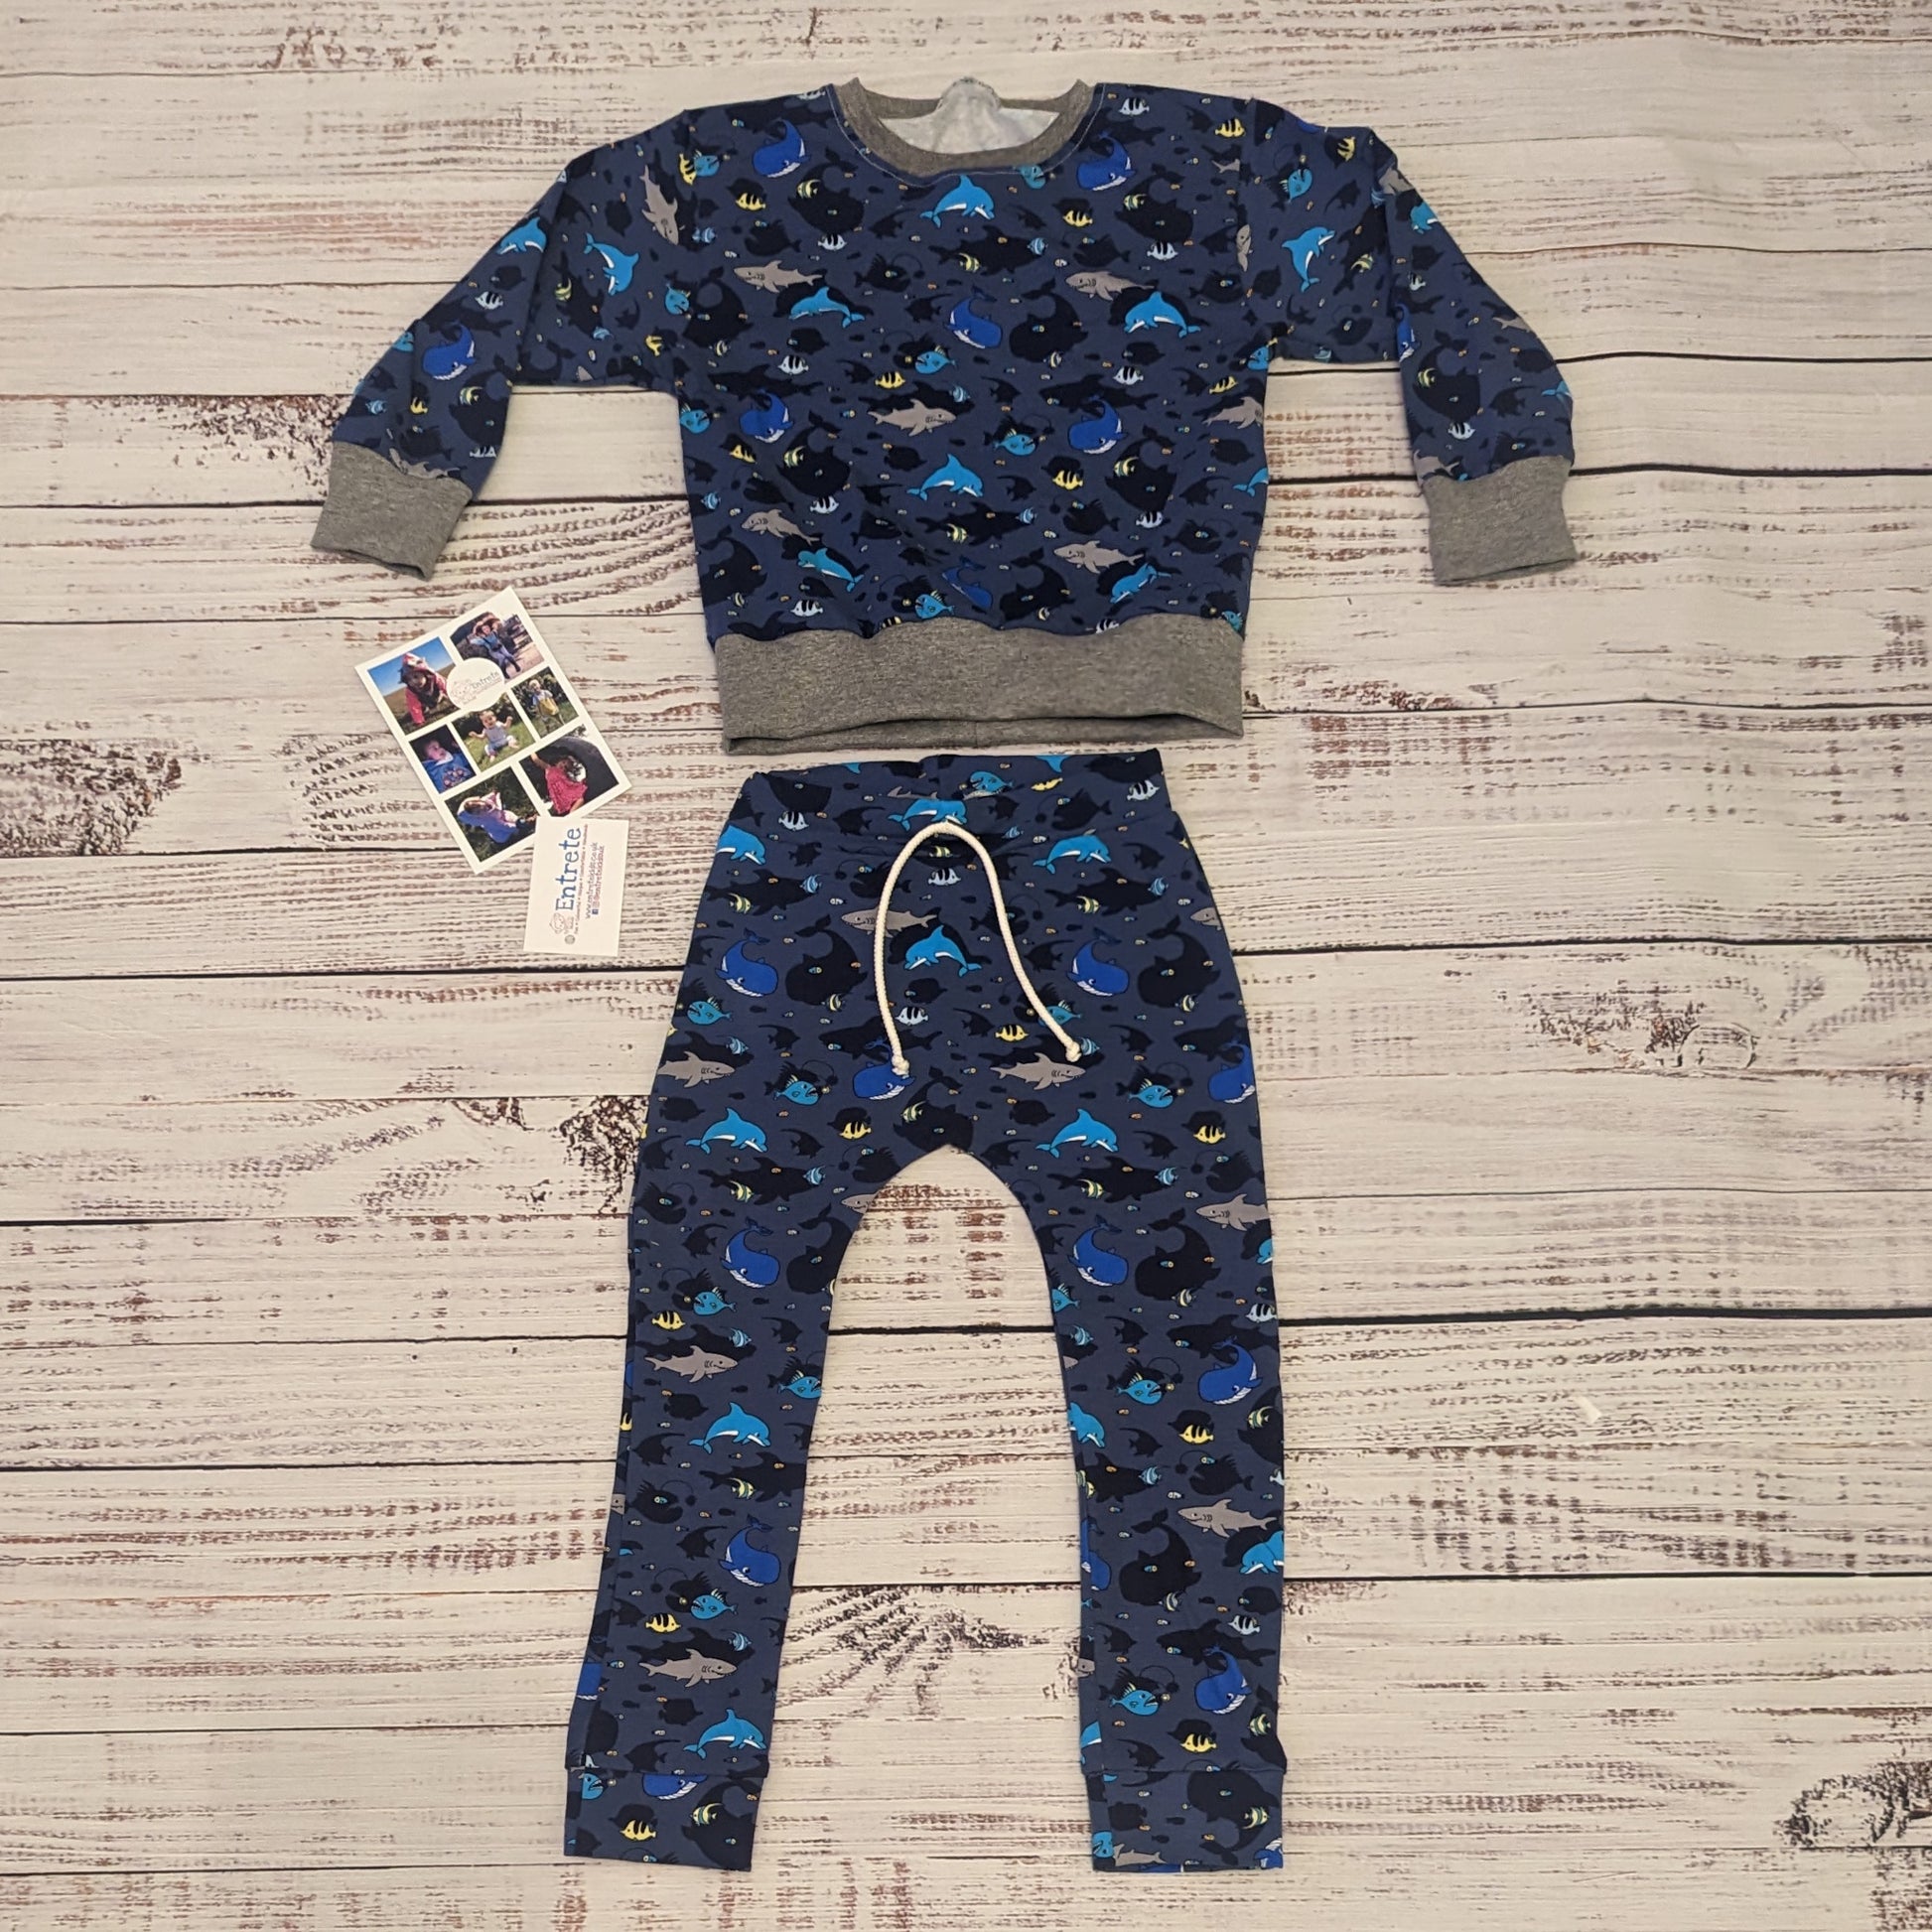 The amazing sea life sweatshirt, packed full of your favourite sea creatures. Handmade using navy sea life shadows cotton jersey and grey cotton ribbing. Shown as an outfit with matching harem joggers.